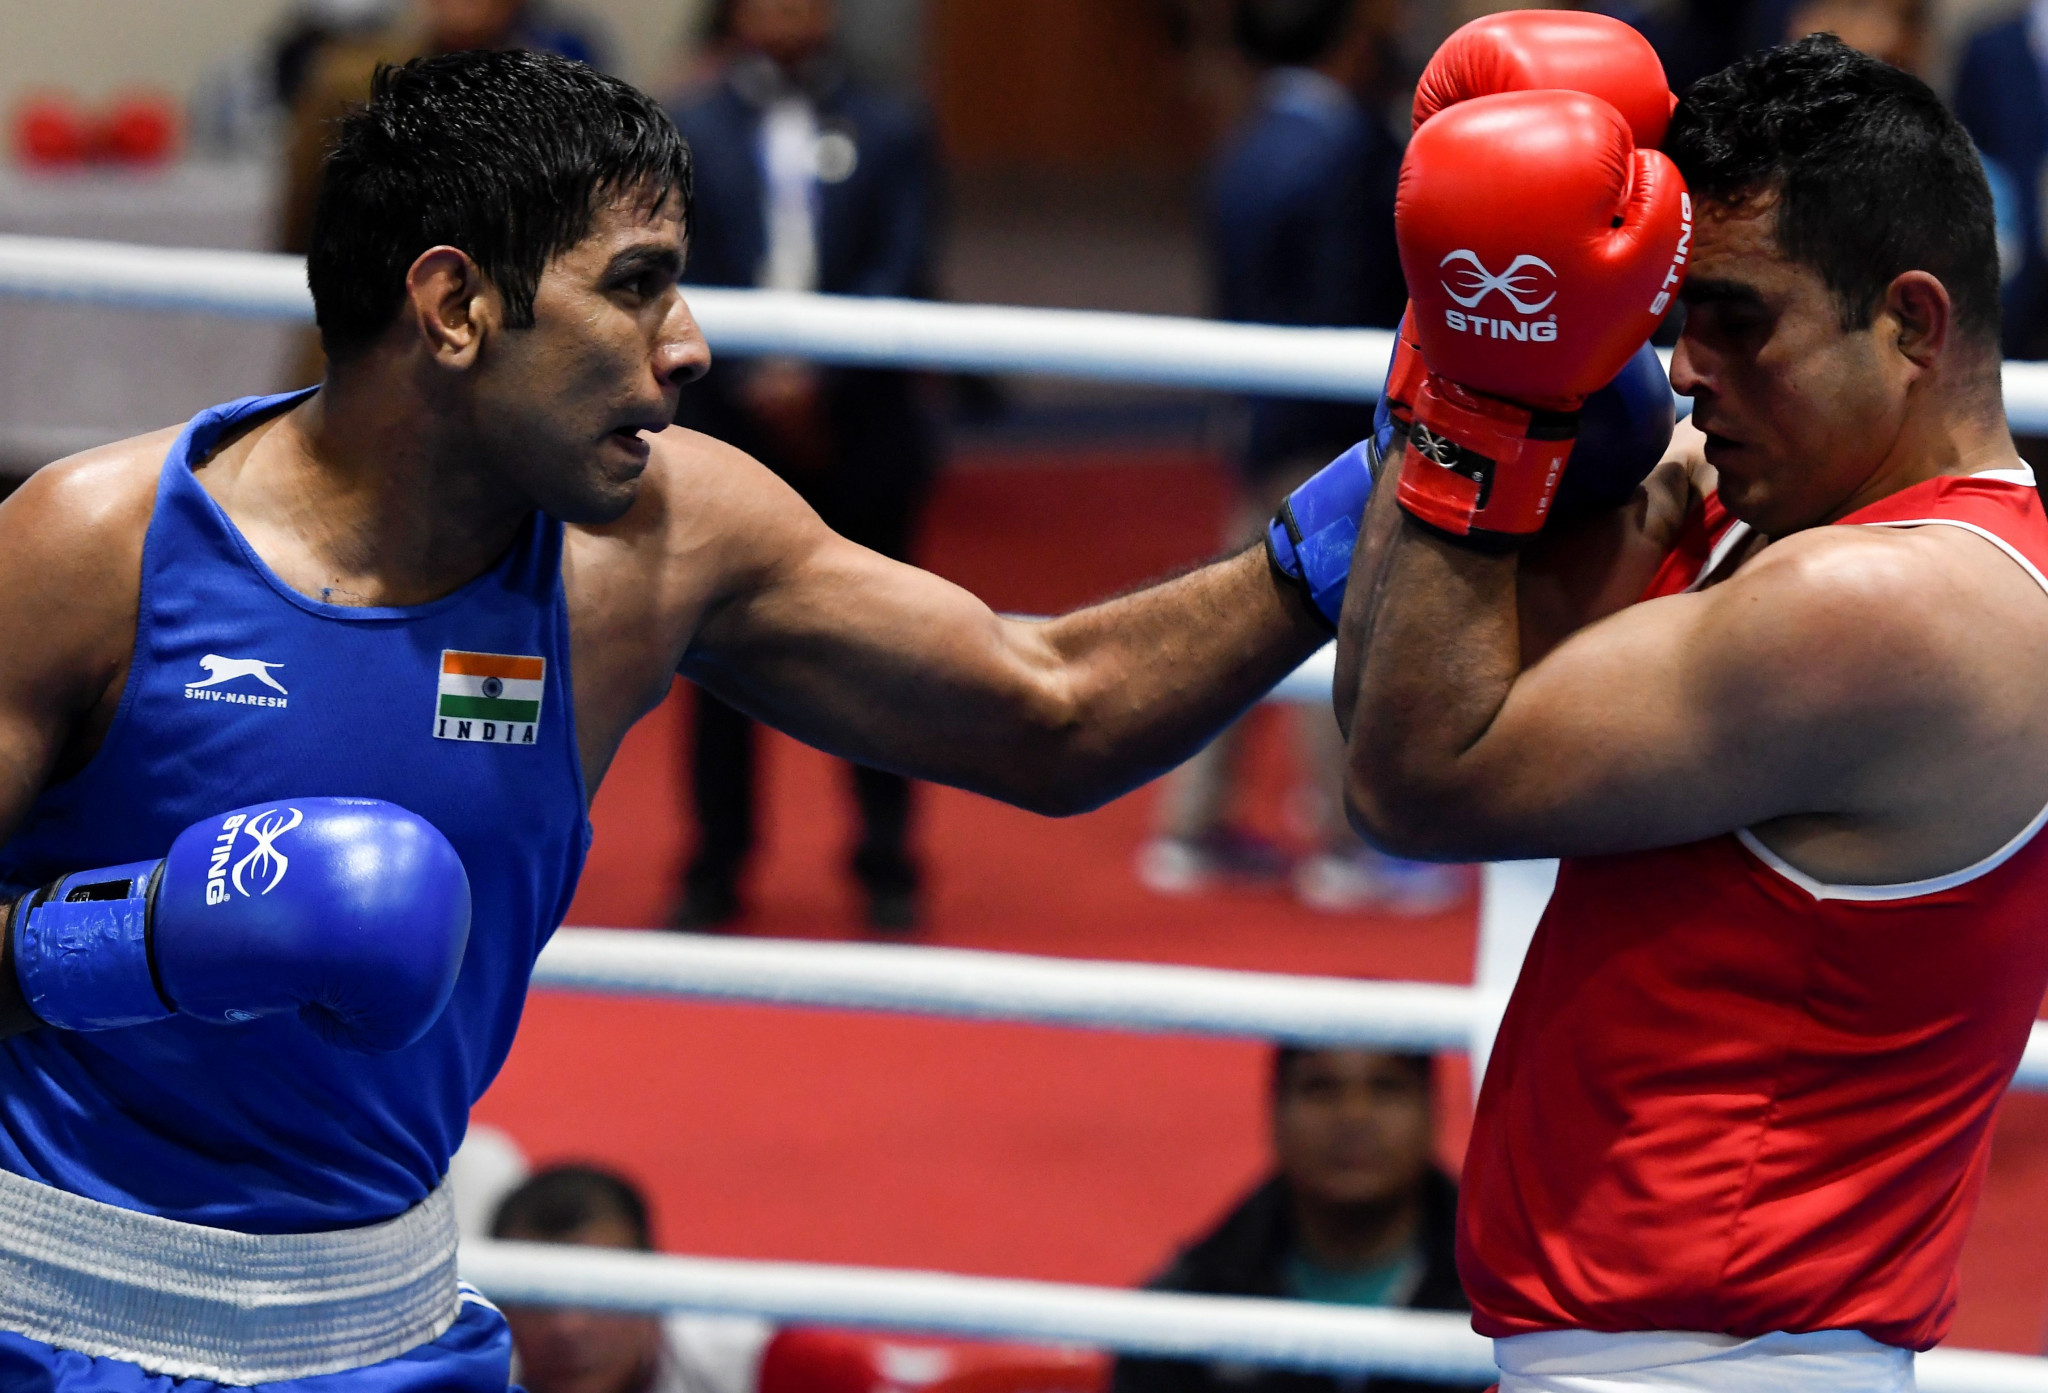 New Delhi was previously stripped of the hosting rights for this year's AIBA Men’s World Boxing Championships ©Getty Images